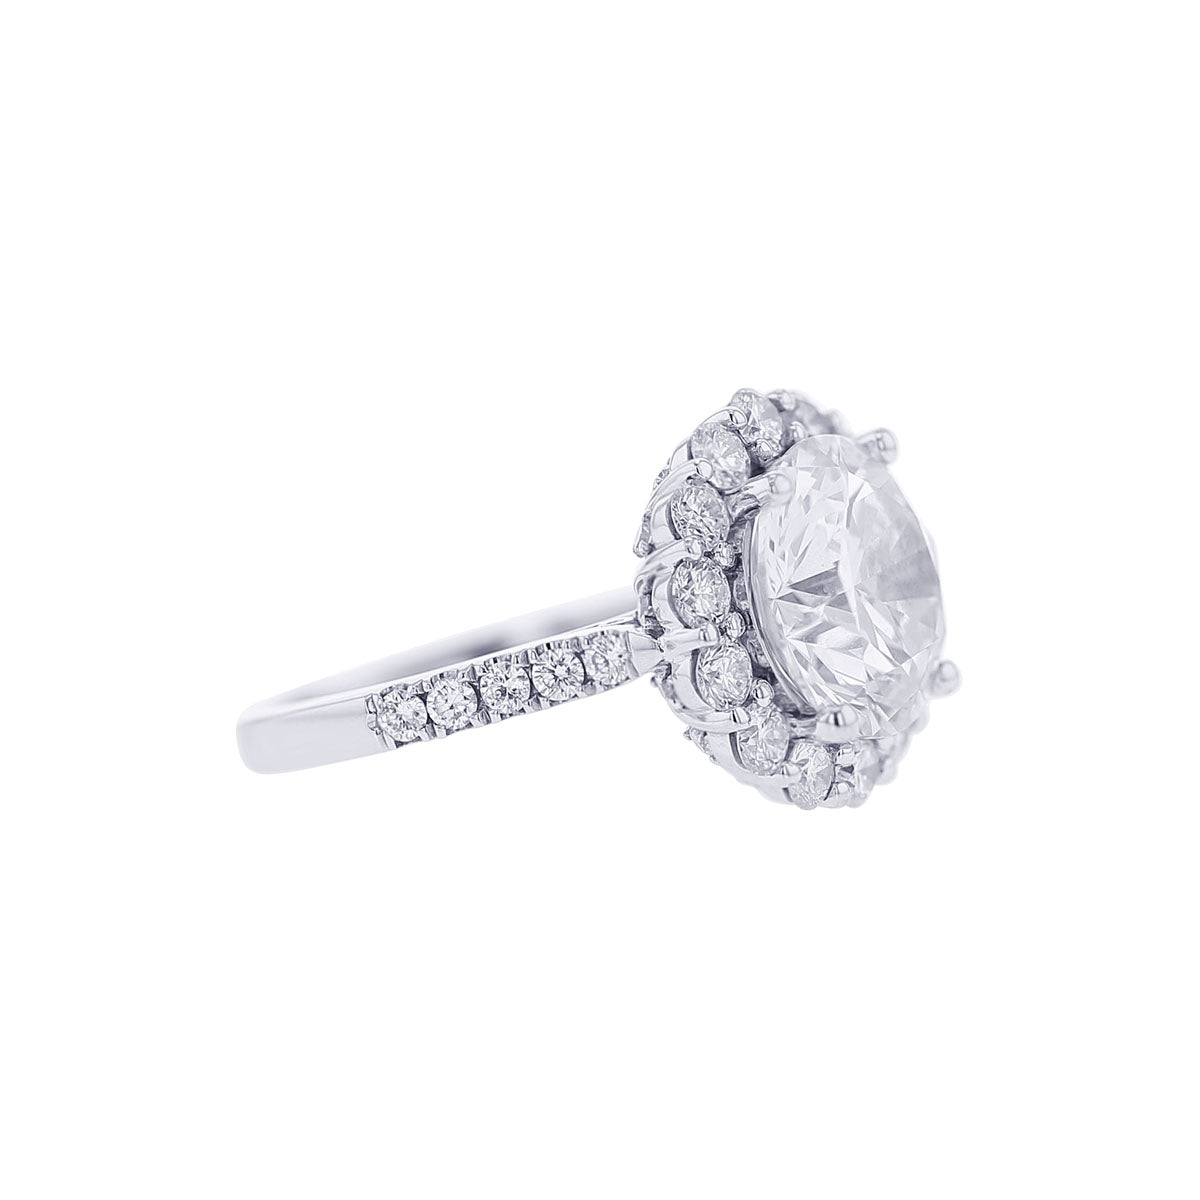 Adelaide Certified Ready for Love Engagement Ring 7 1/2ct